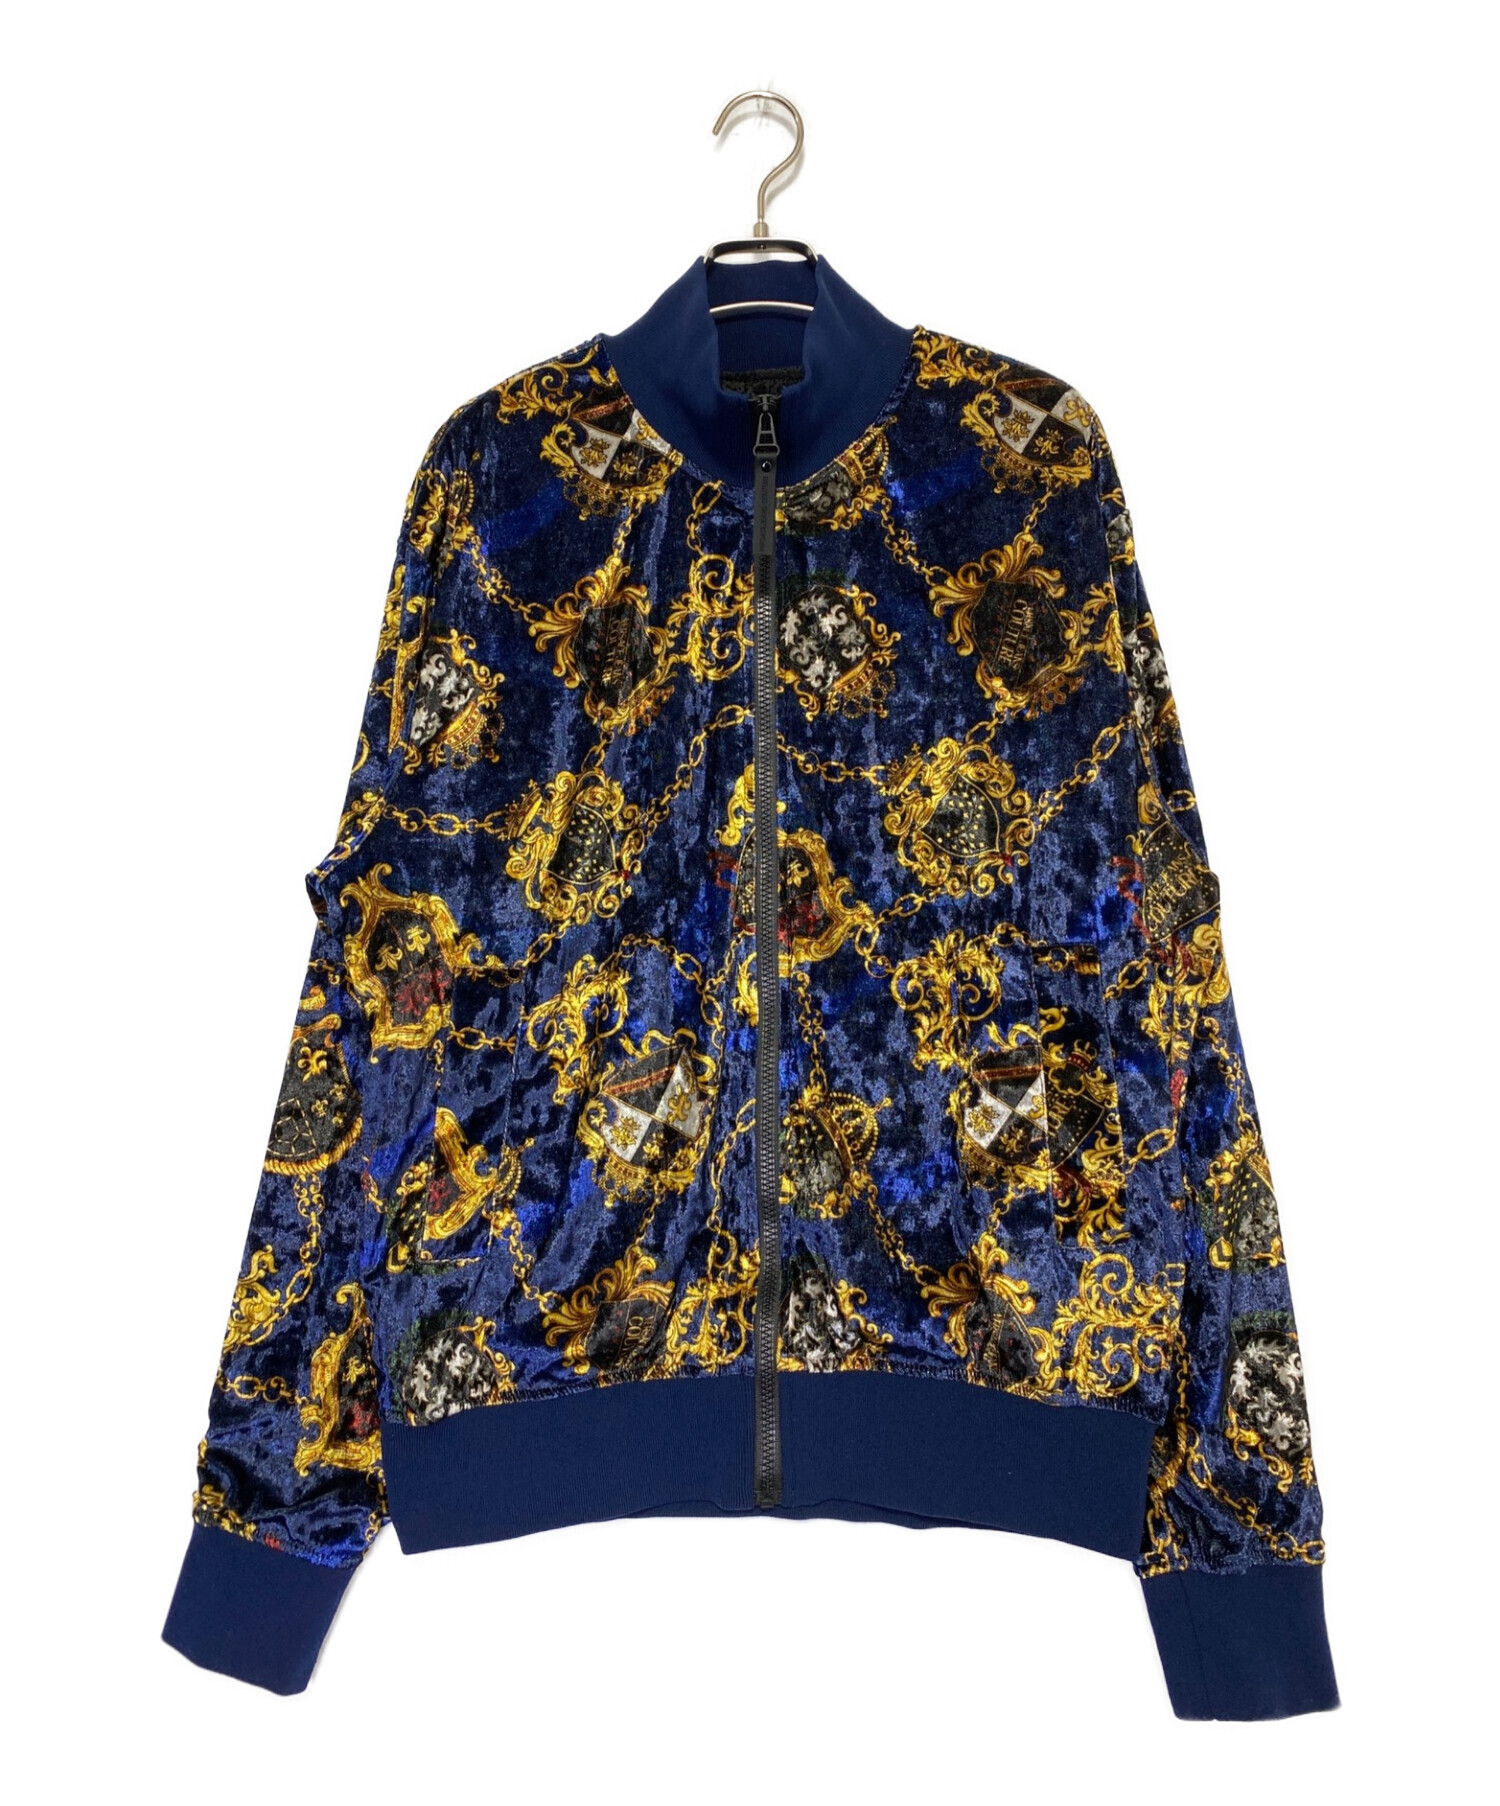 VERSACE JEANS COUTURE  ジャンパー  ヴェルサーチ